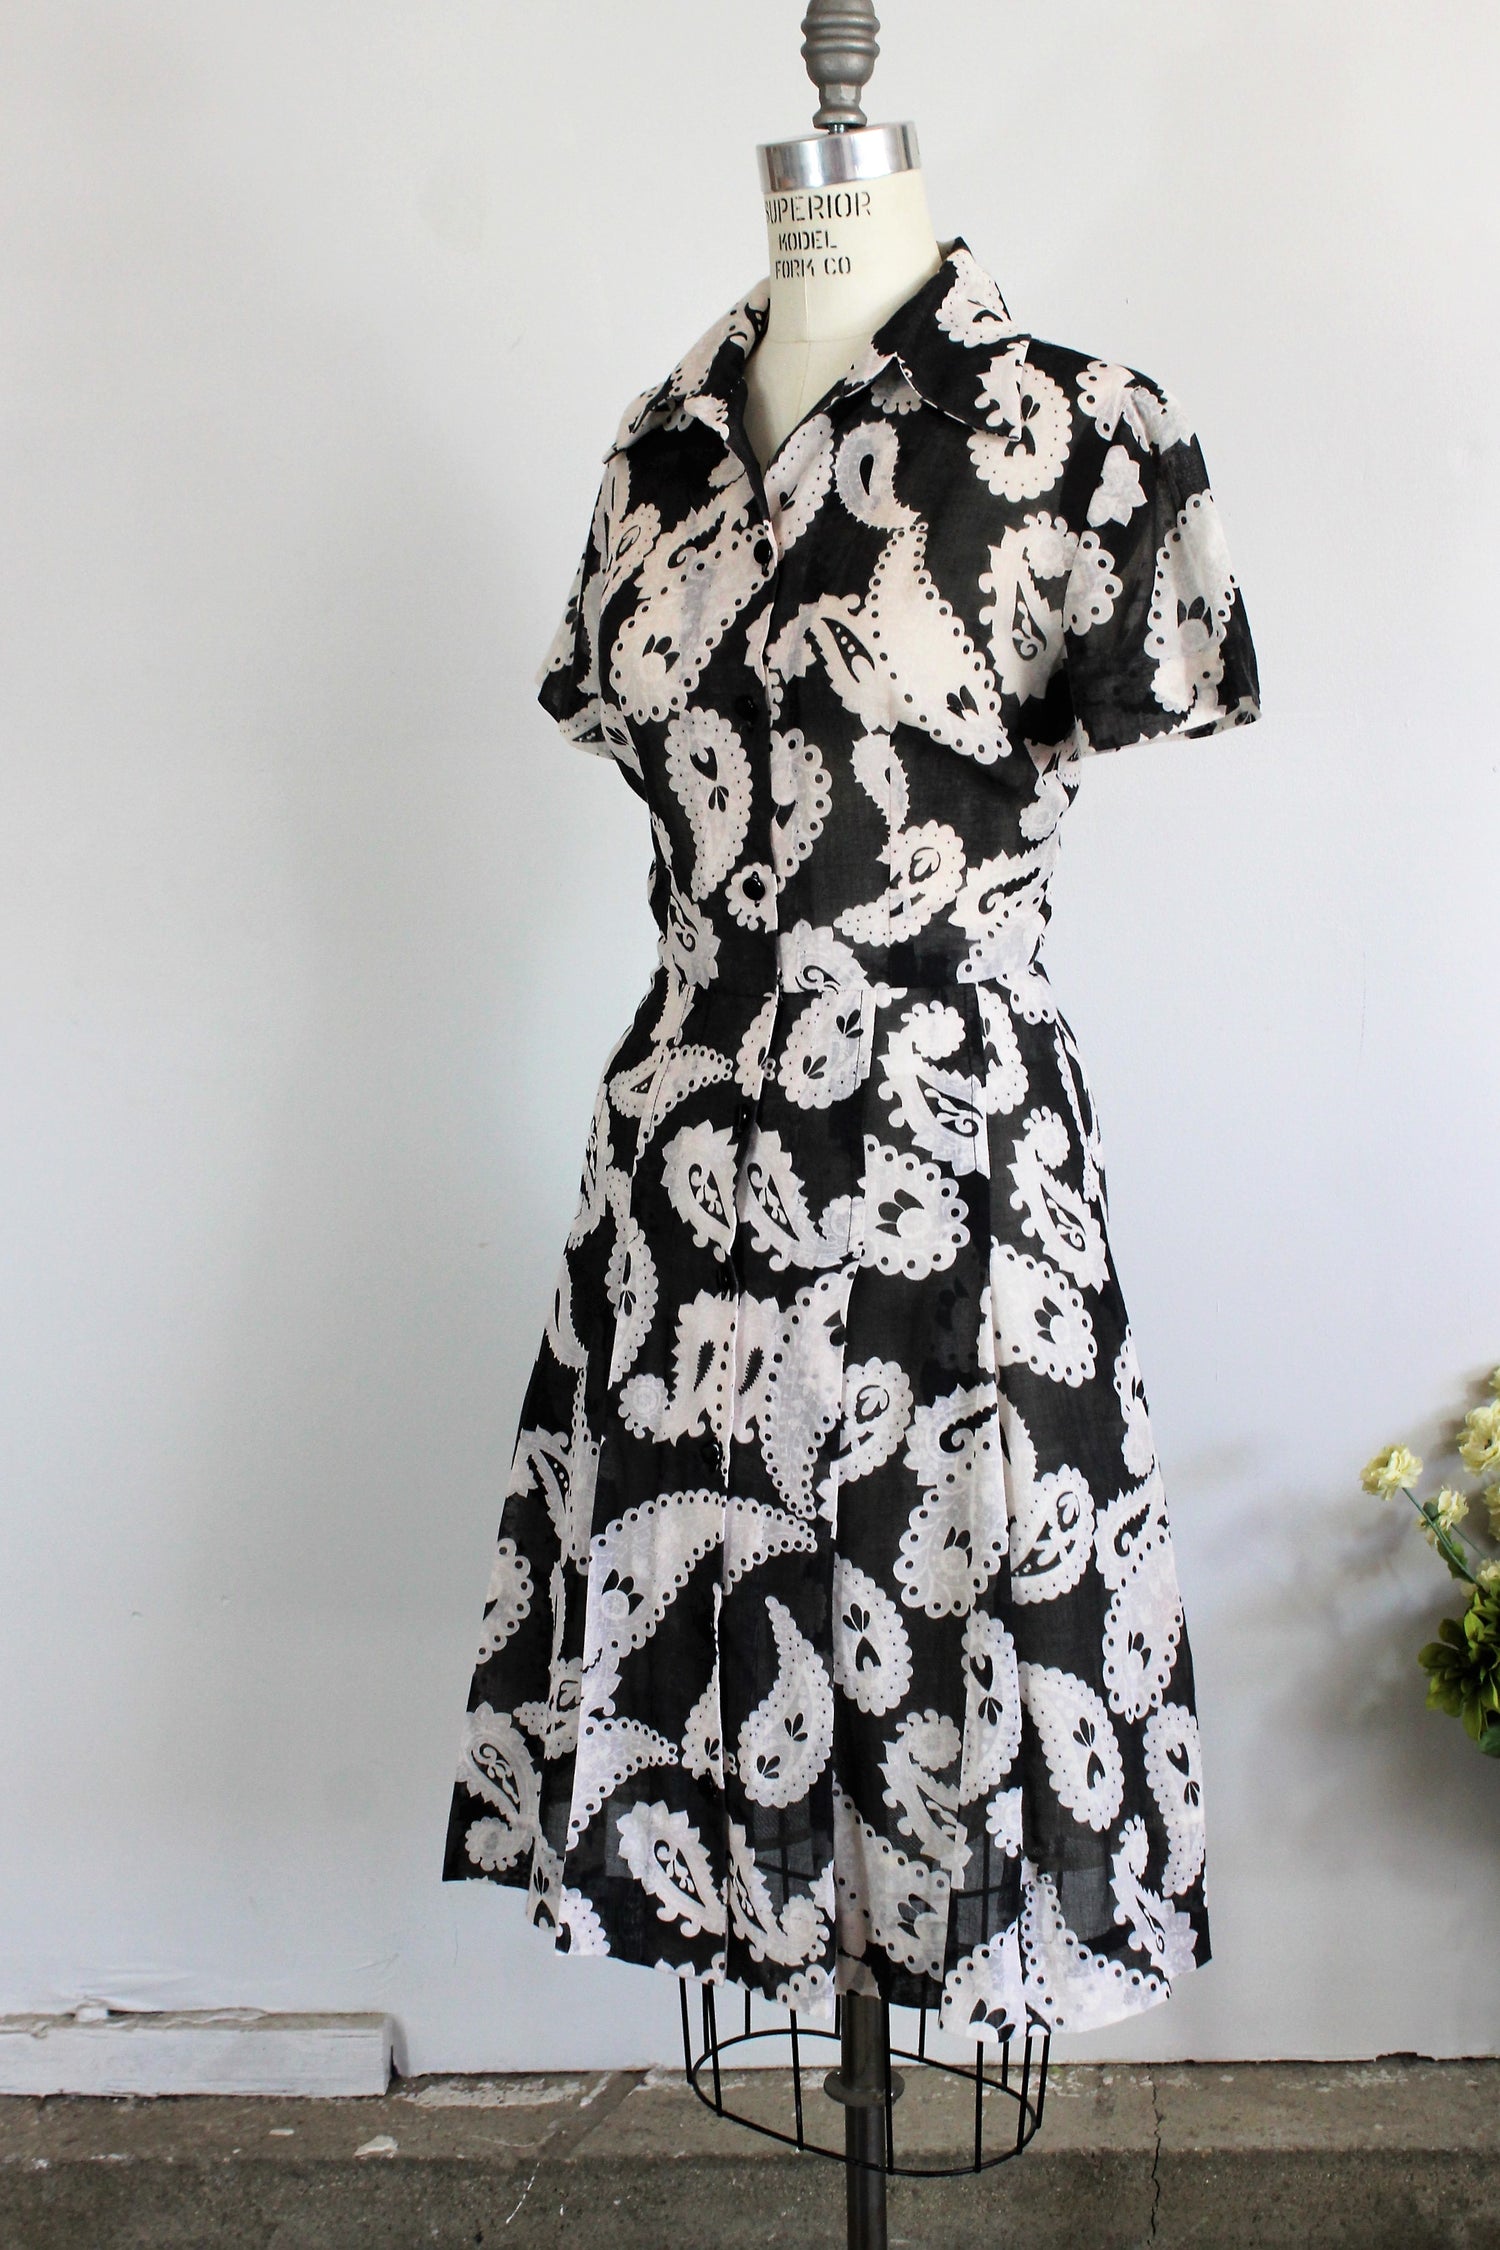 Vintage 1970s Does 1950s Shirtwaist Dress In A Black And White Paisley Print 